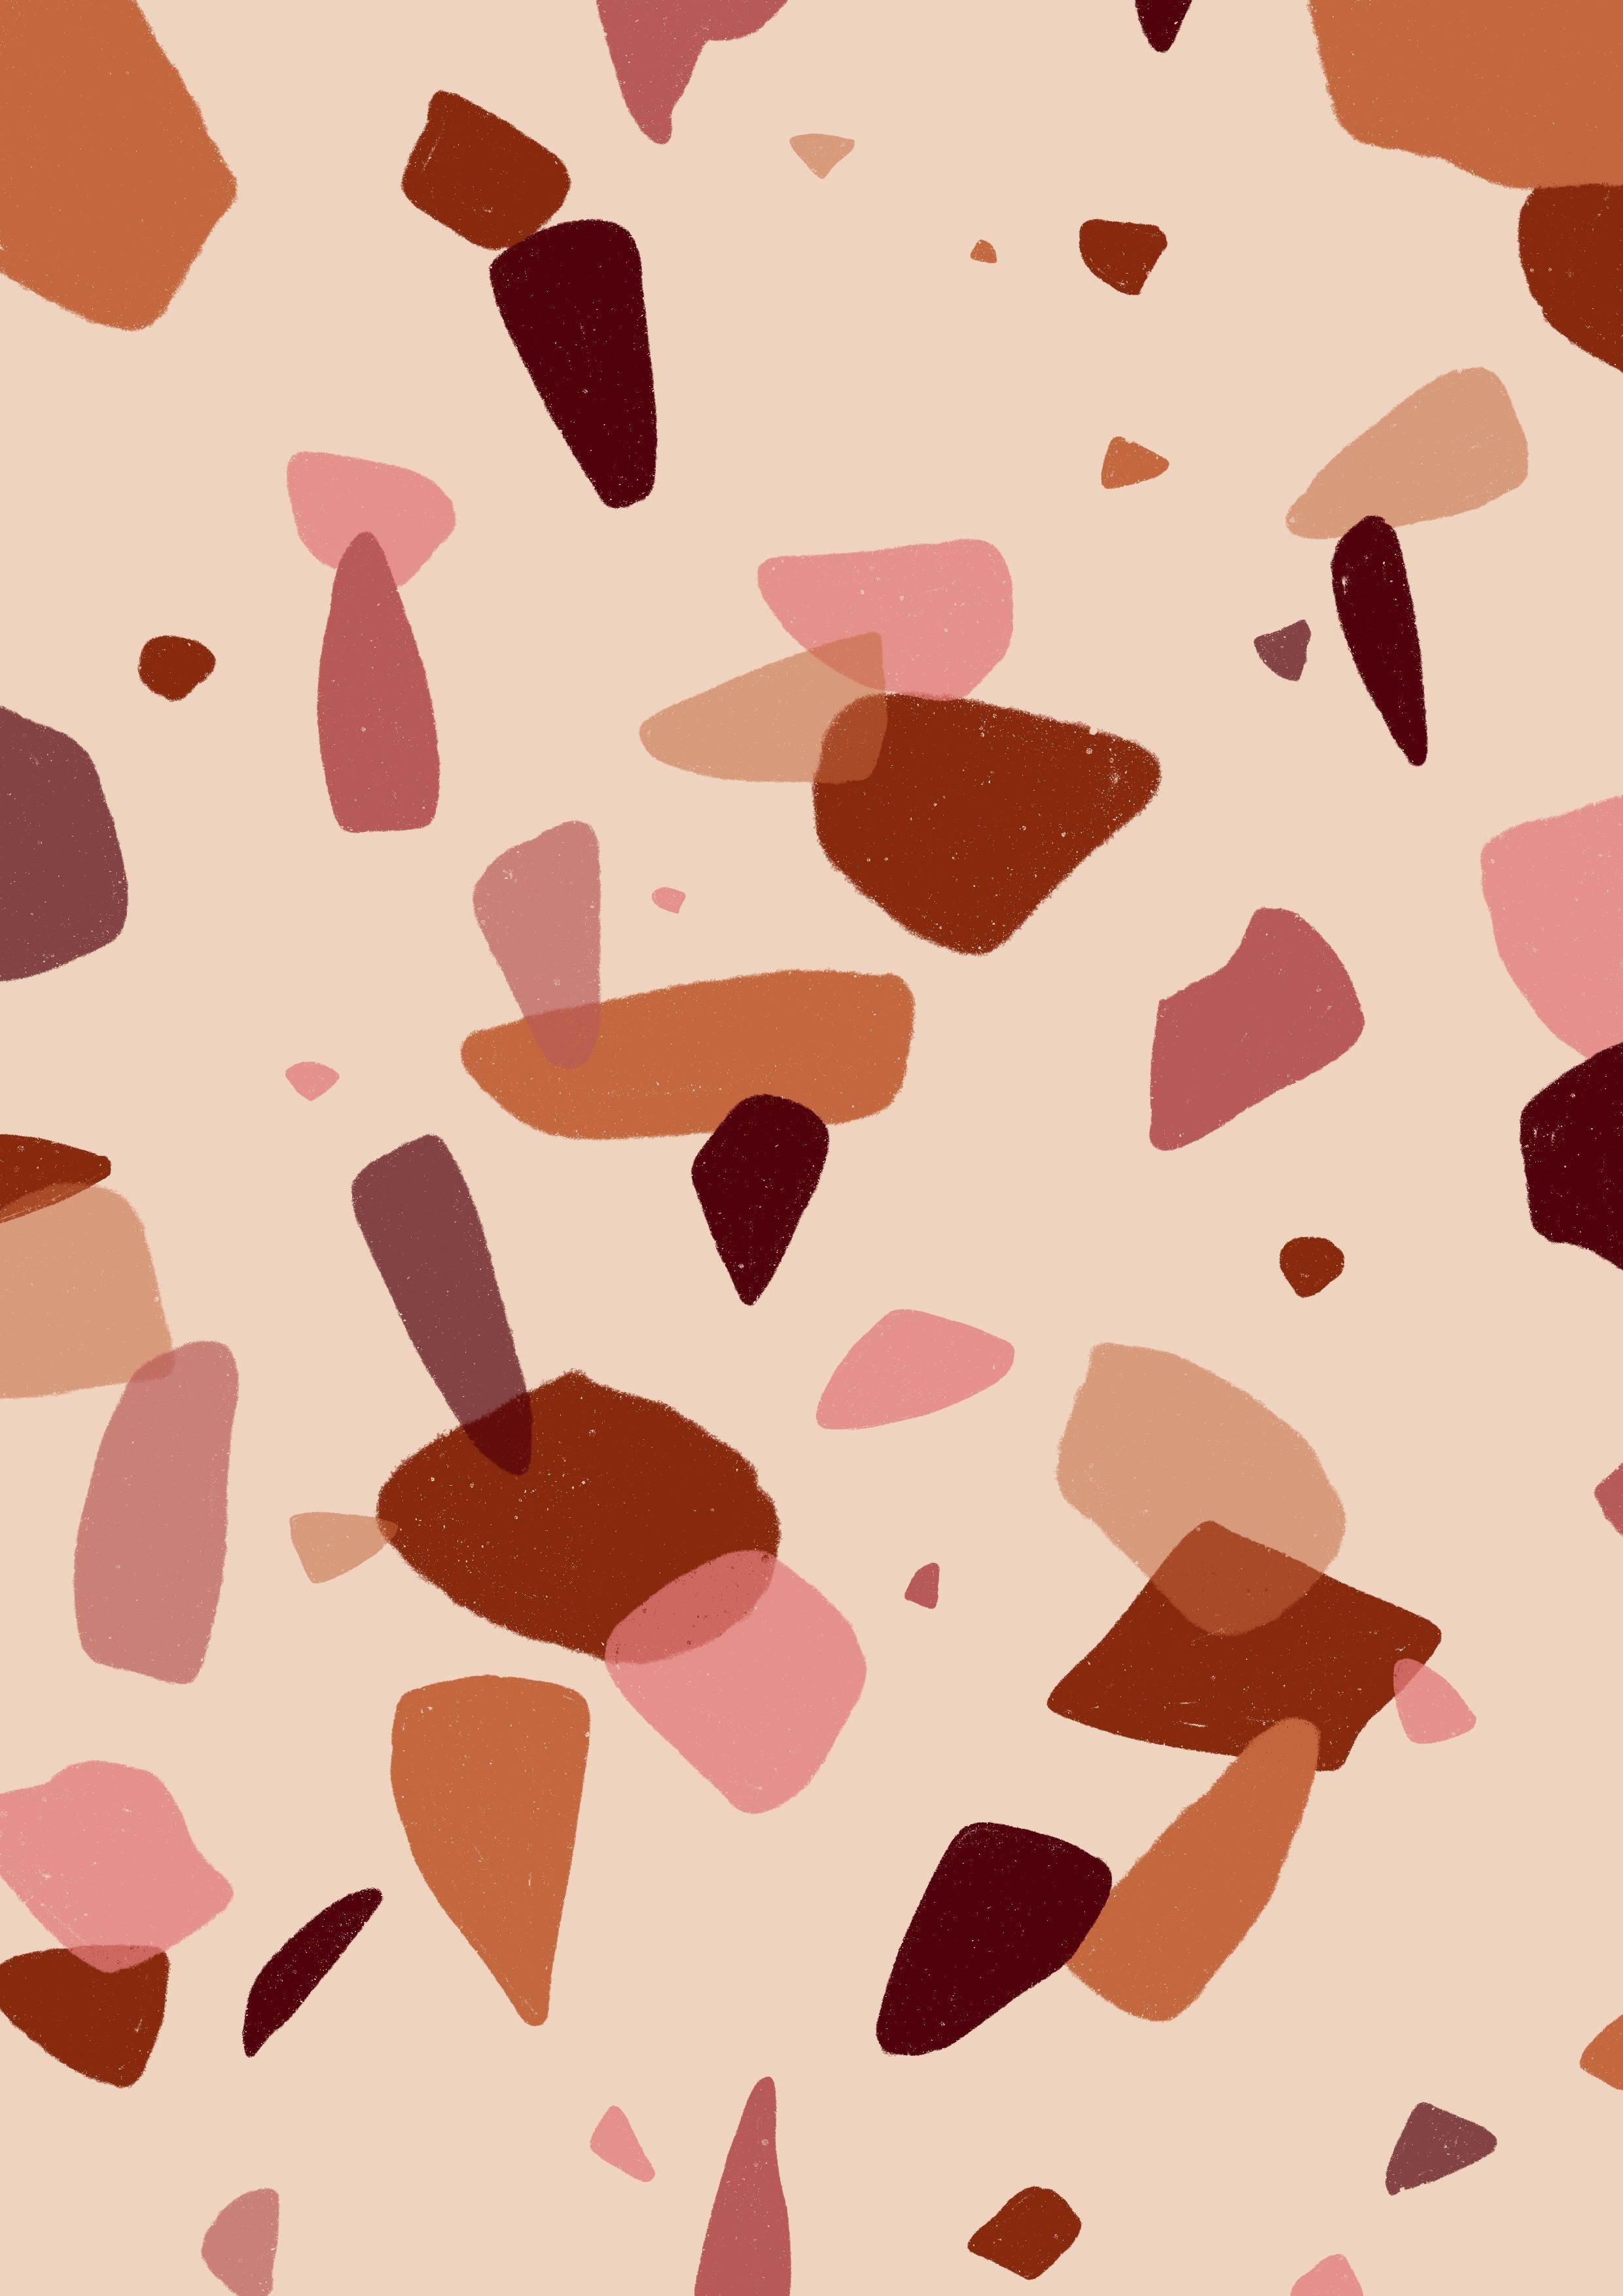 A pattern of rocks in brown and pink - Terracotta